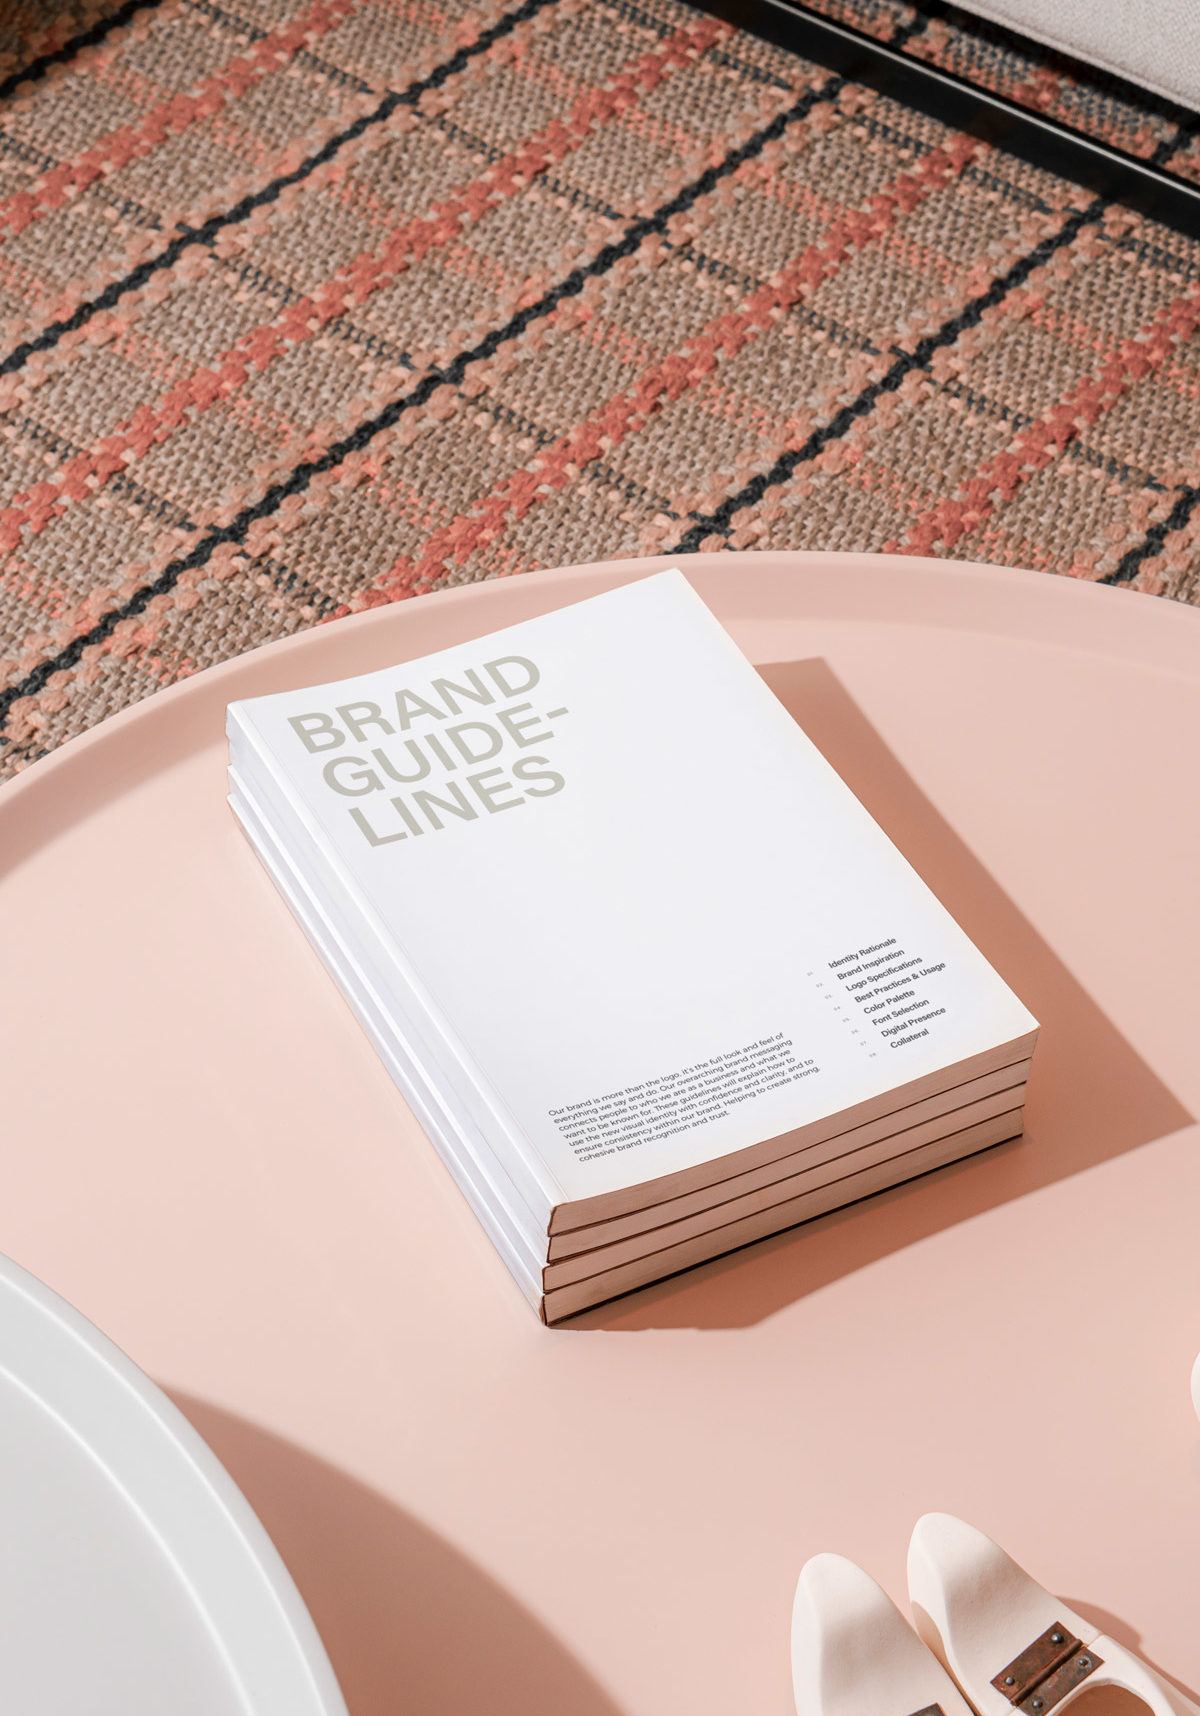 Brand guidelines booklet on top of a pink side table